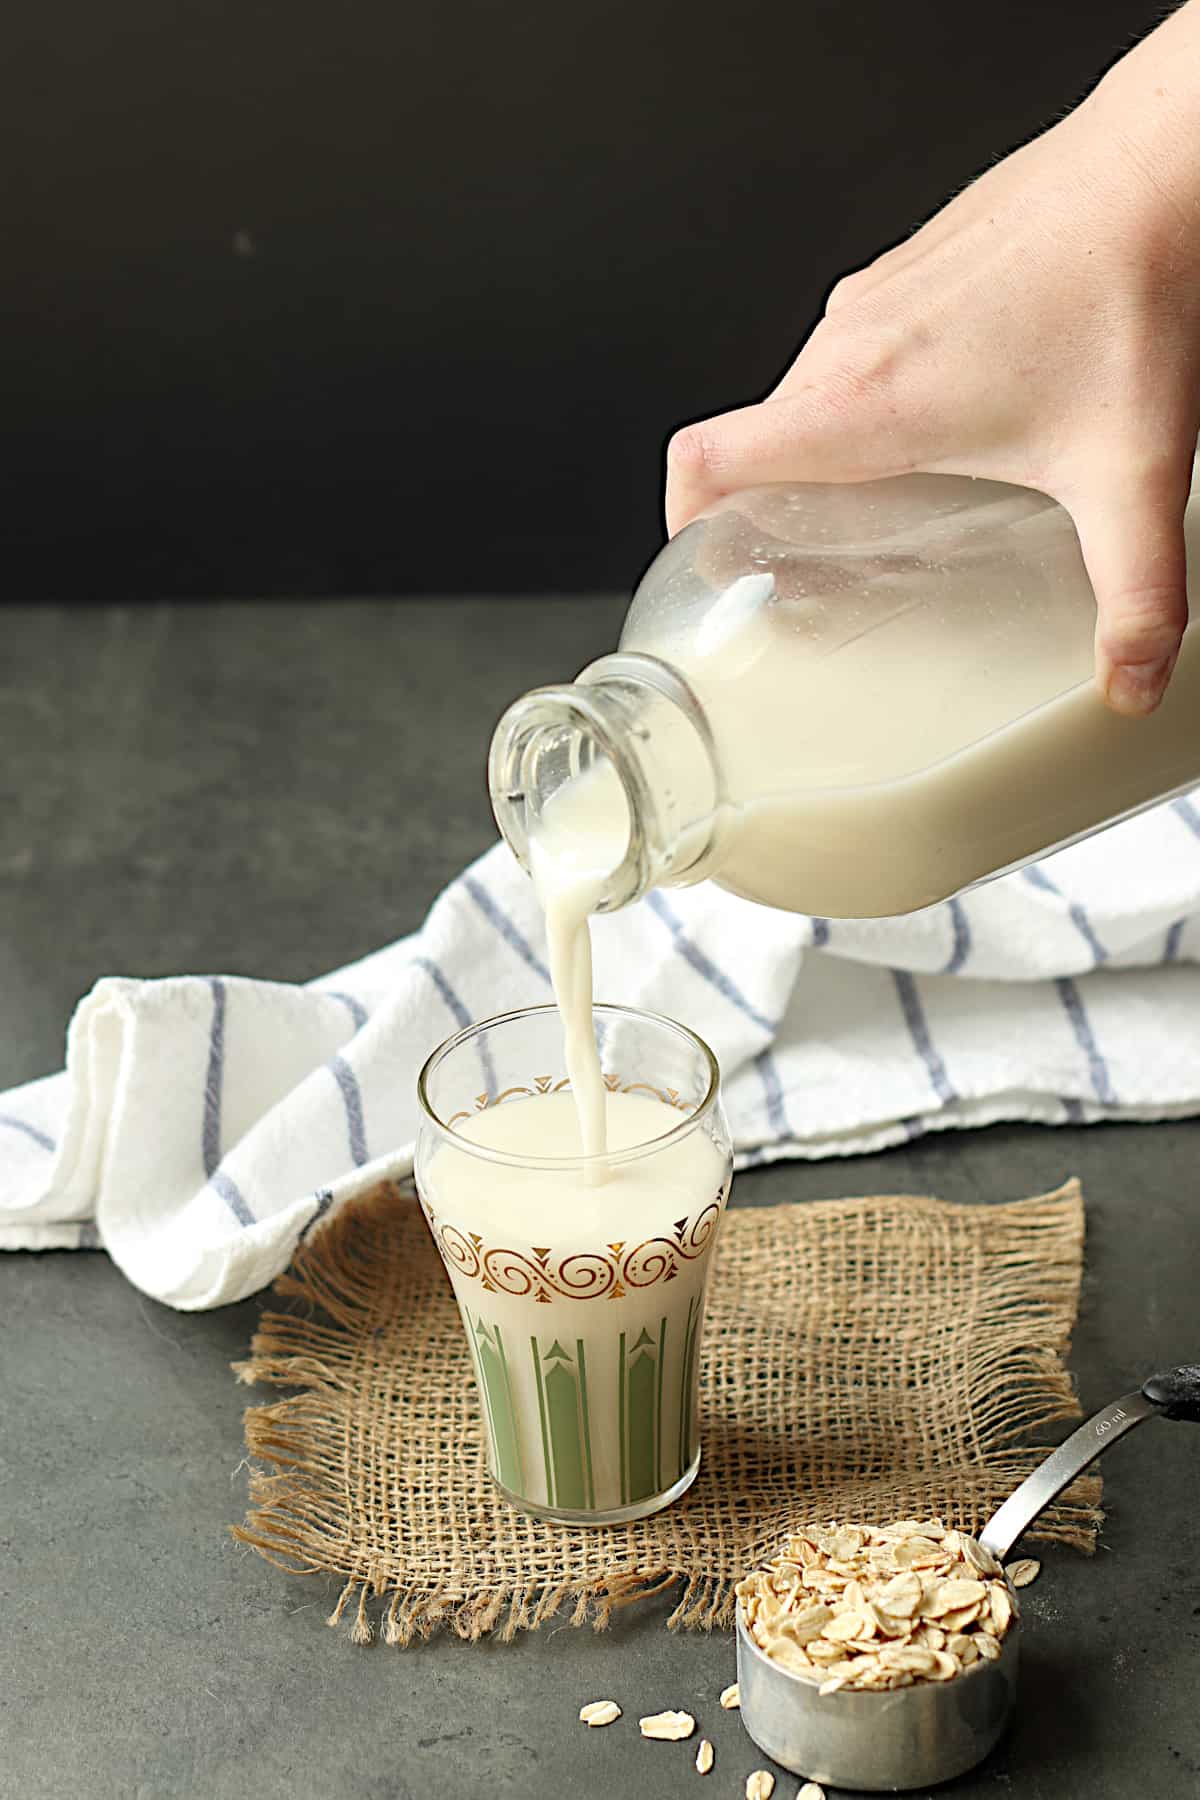 A hand pouring homemade oat milk from a glass bottle into a glass